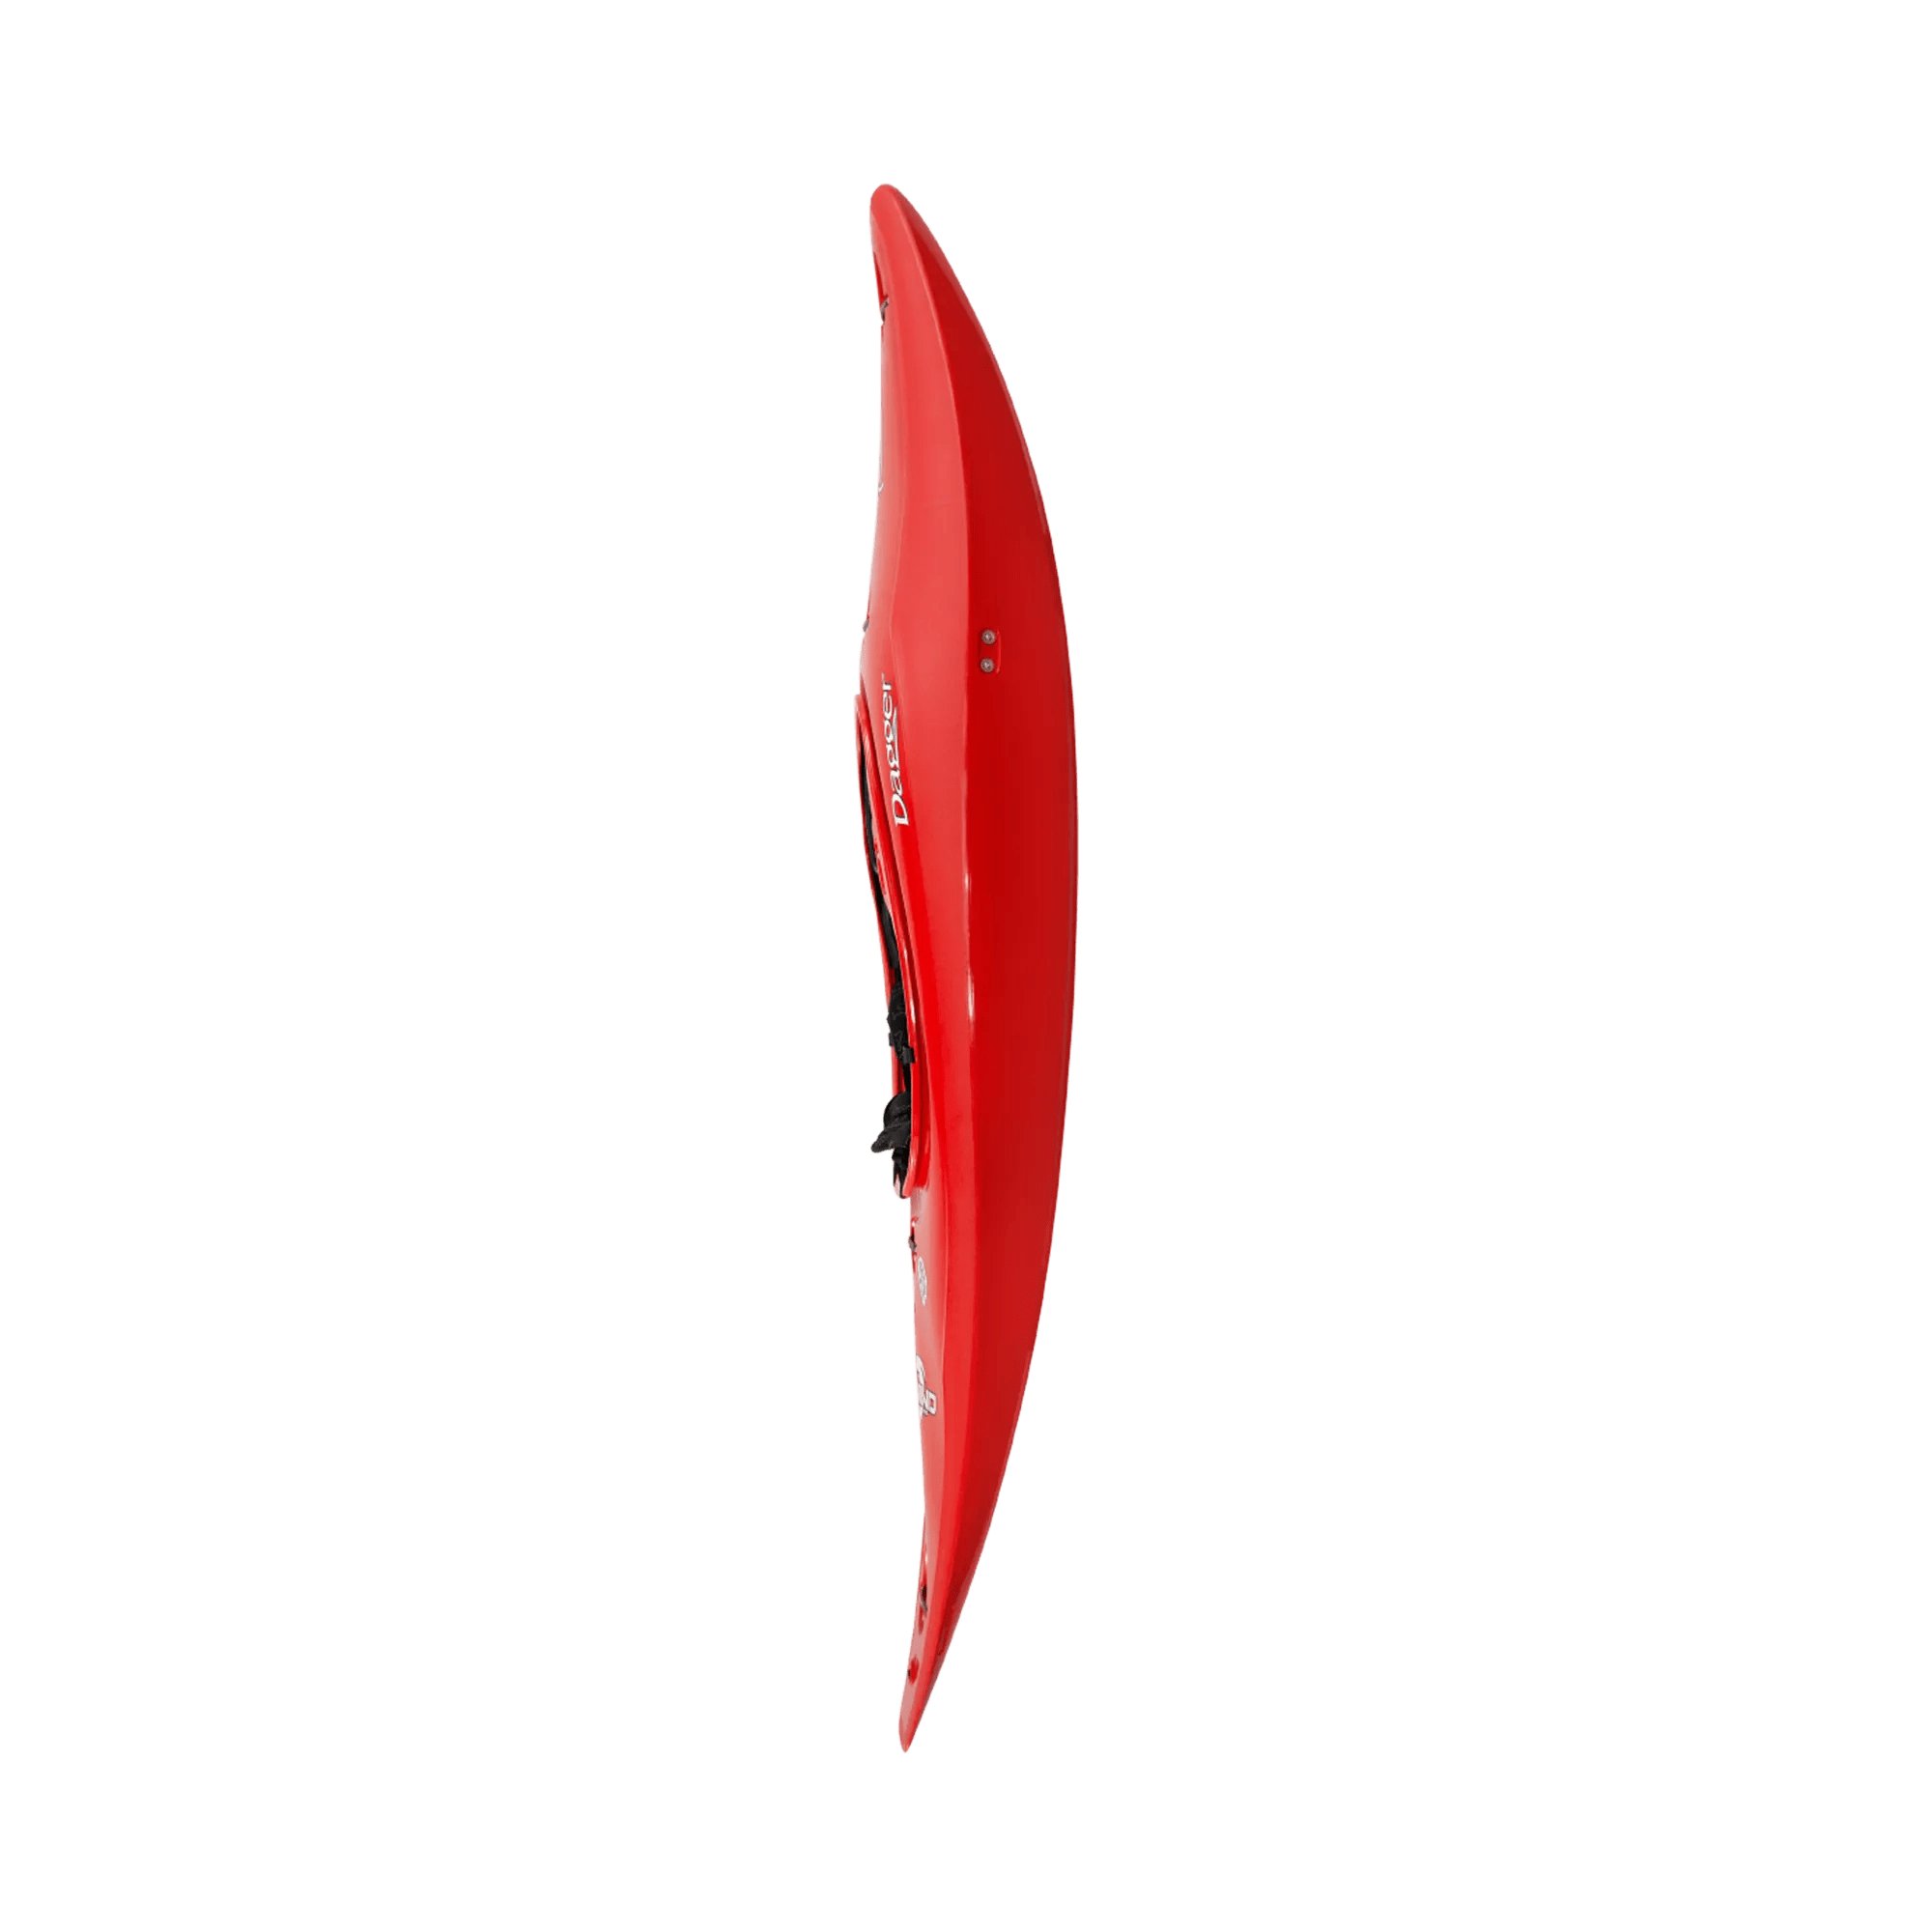 DAGGER - Rewind L River Play Whitewater Kayak - Red - 9010480057 - SIDE